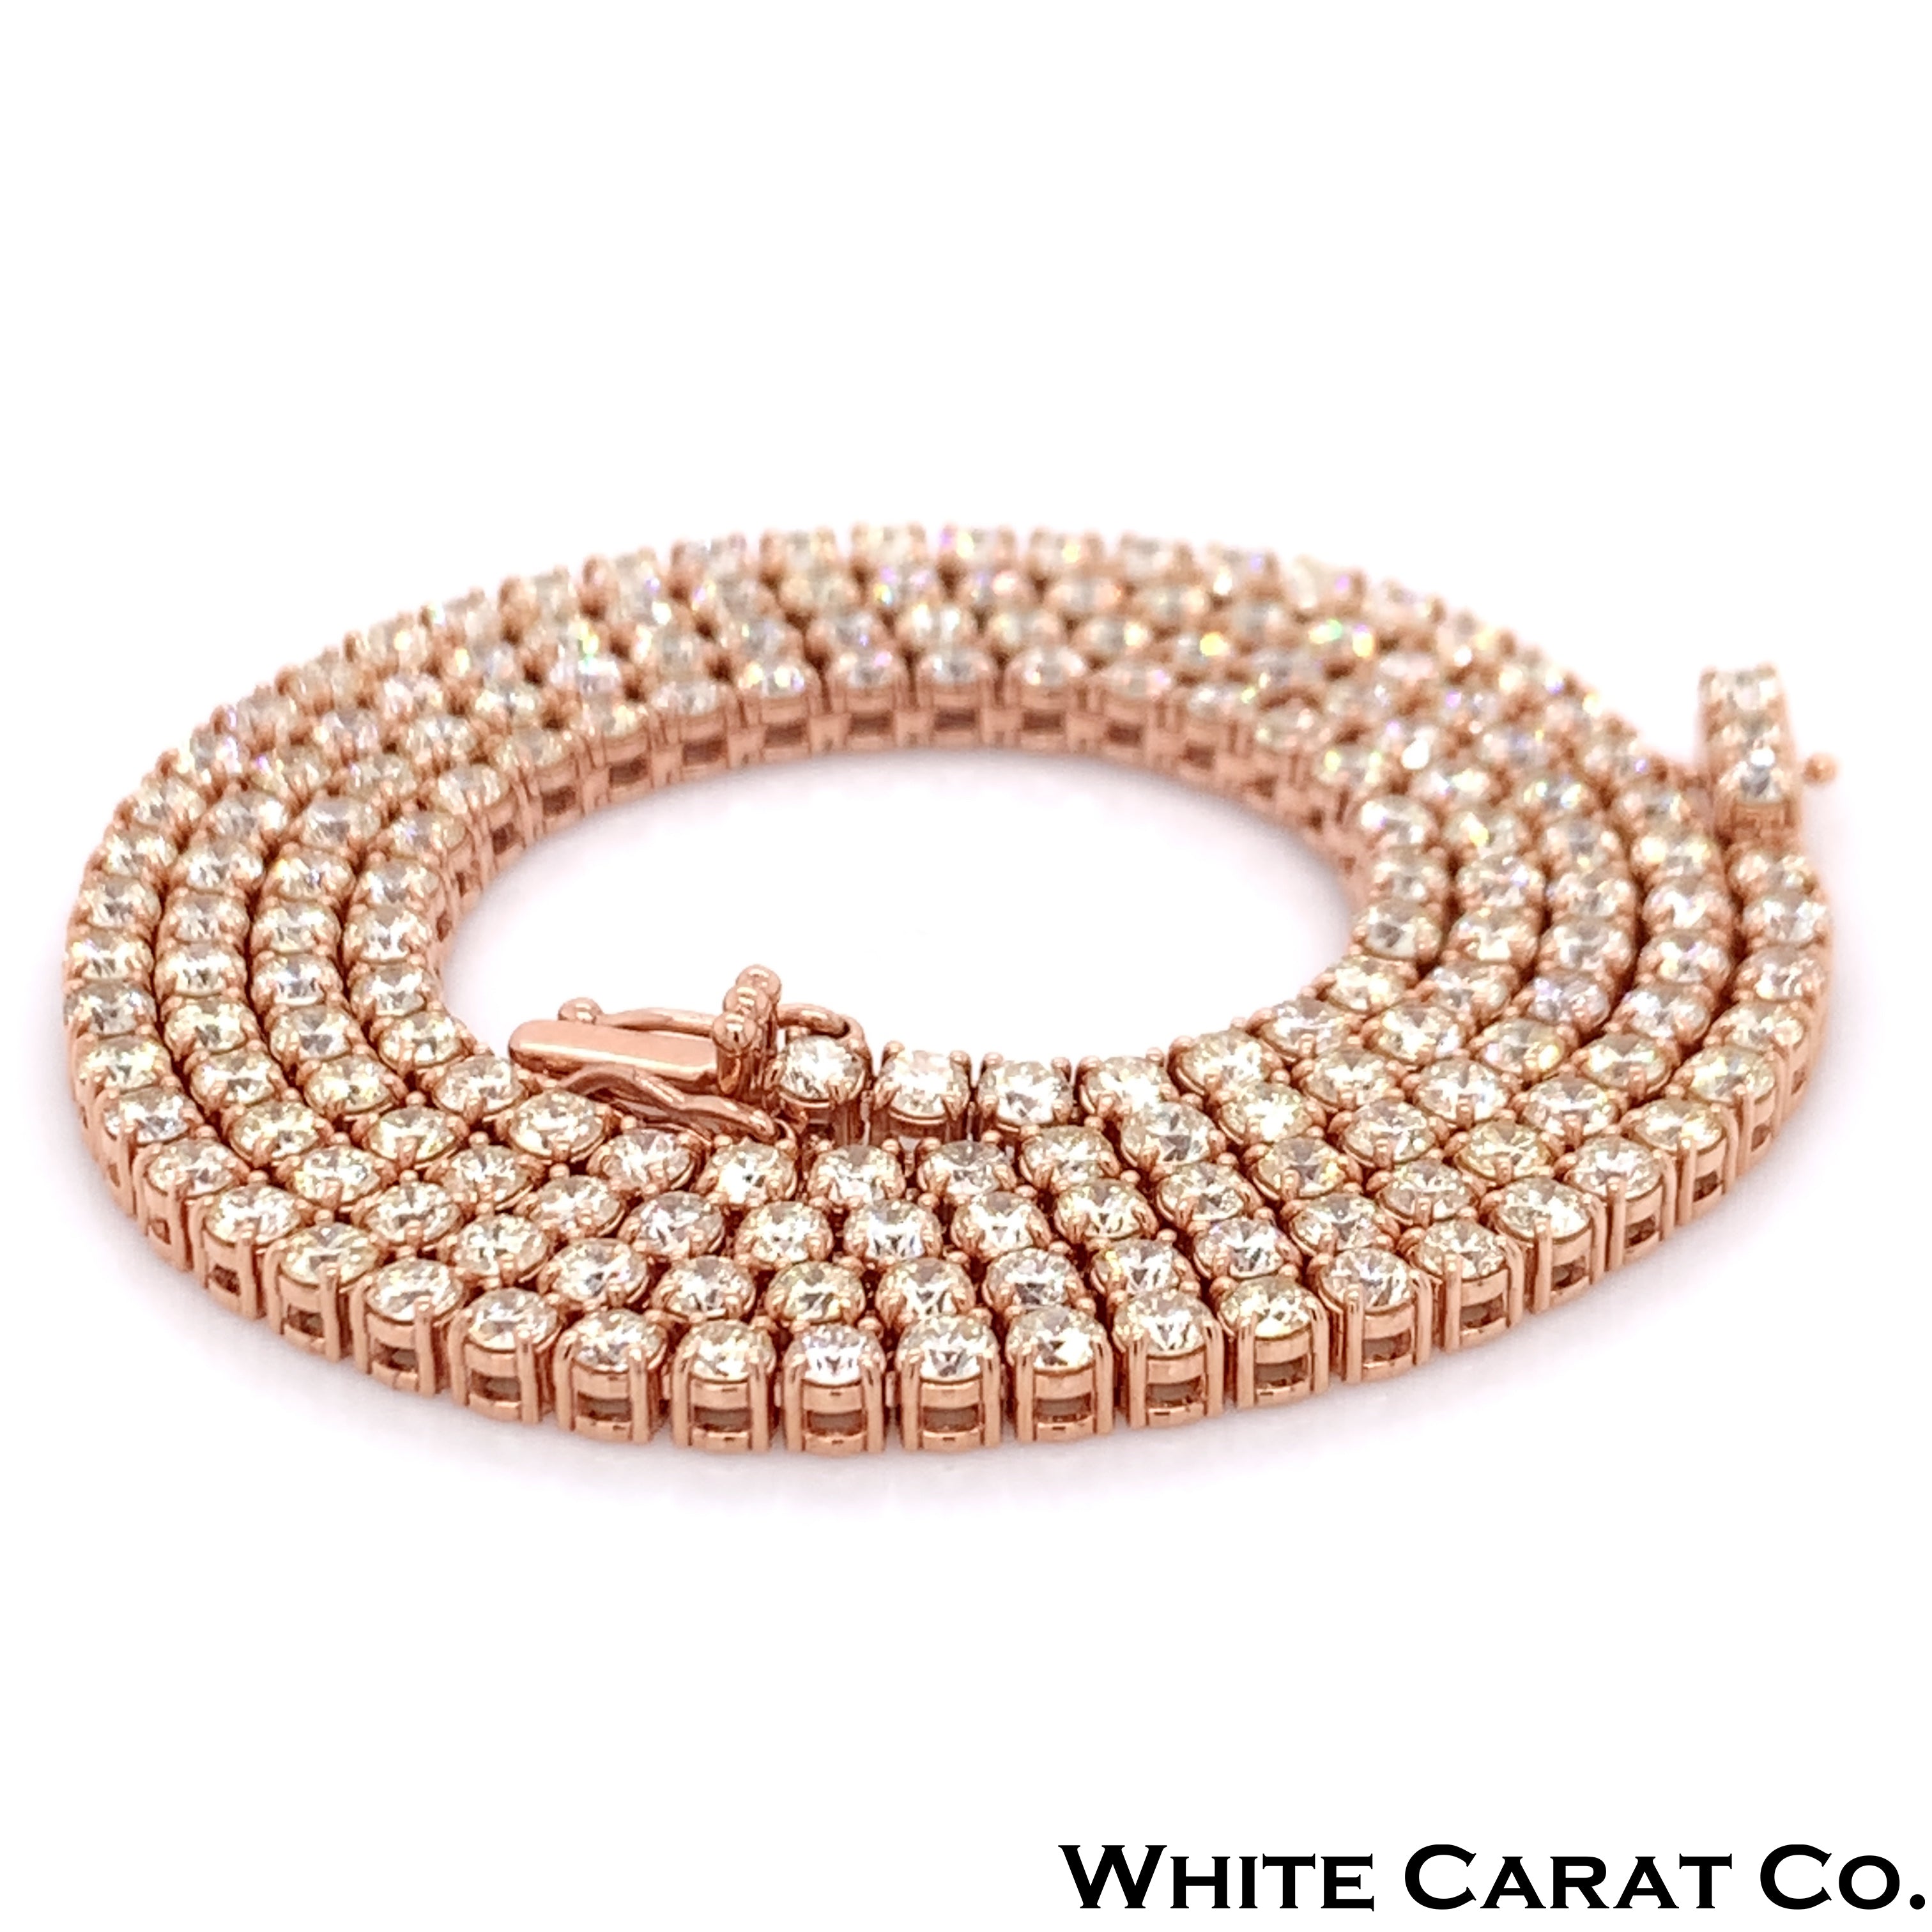 10PT- 15.20 CT. VVS Tennis Necklace in 14K Rose Gold (4 Prong) - White Carat - USA & Canada